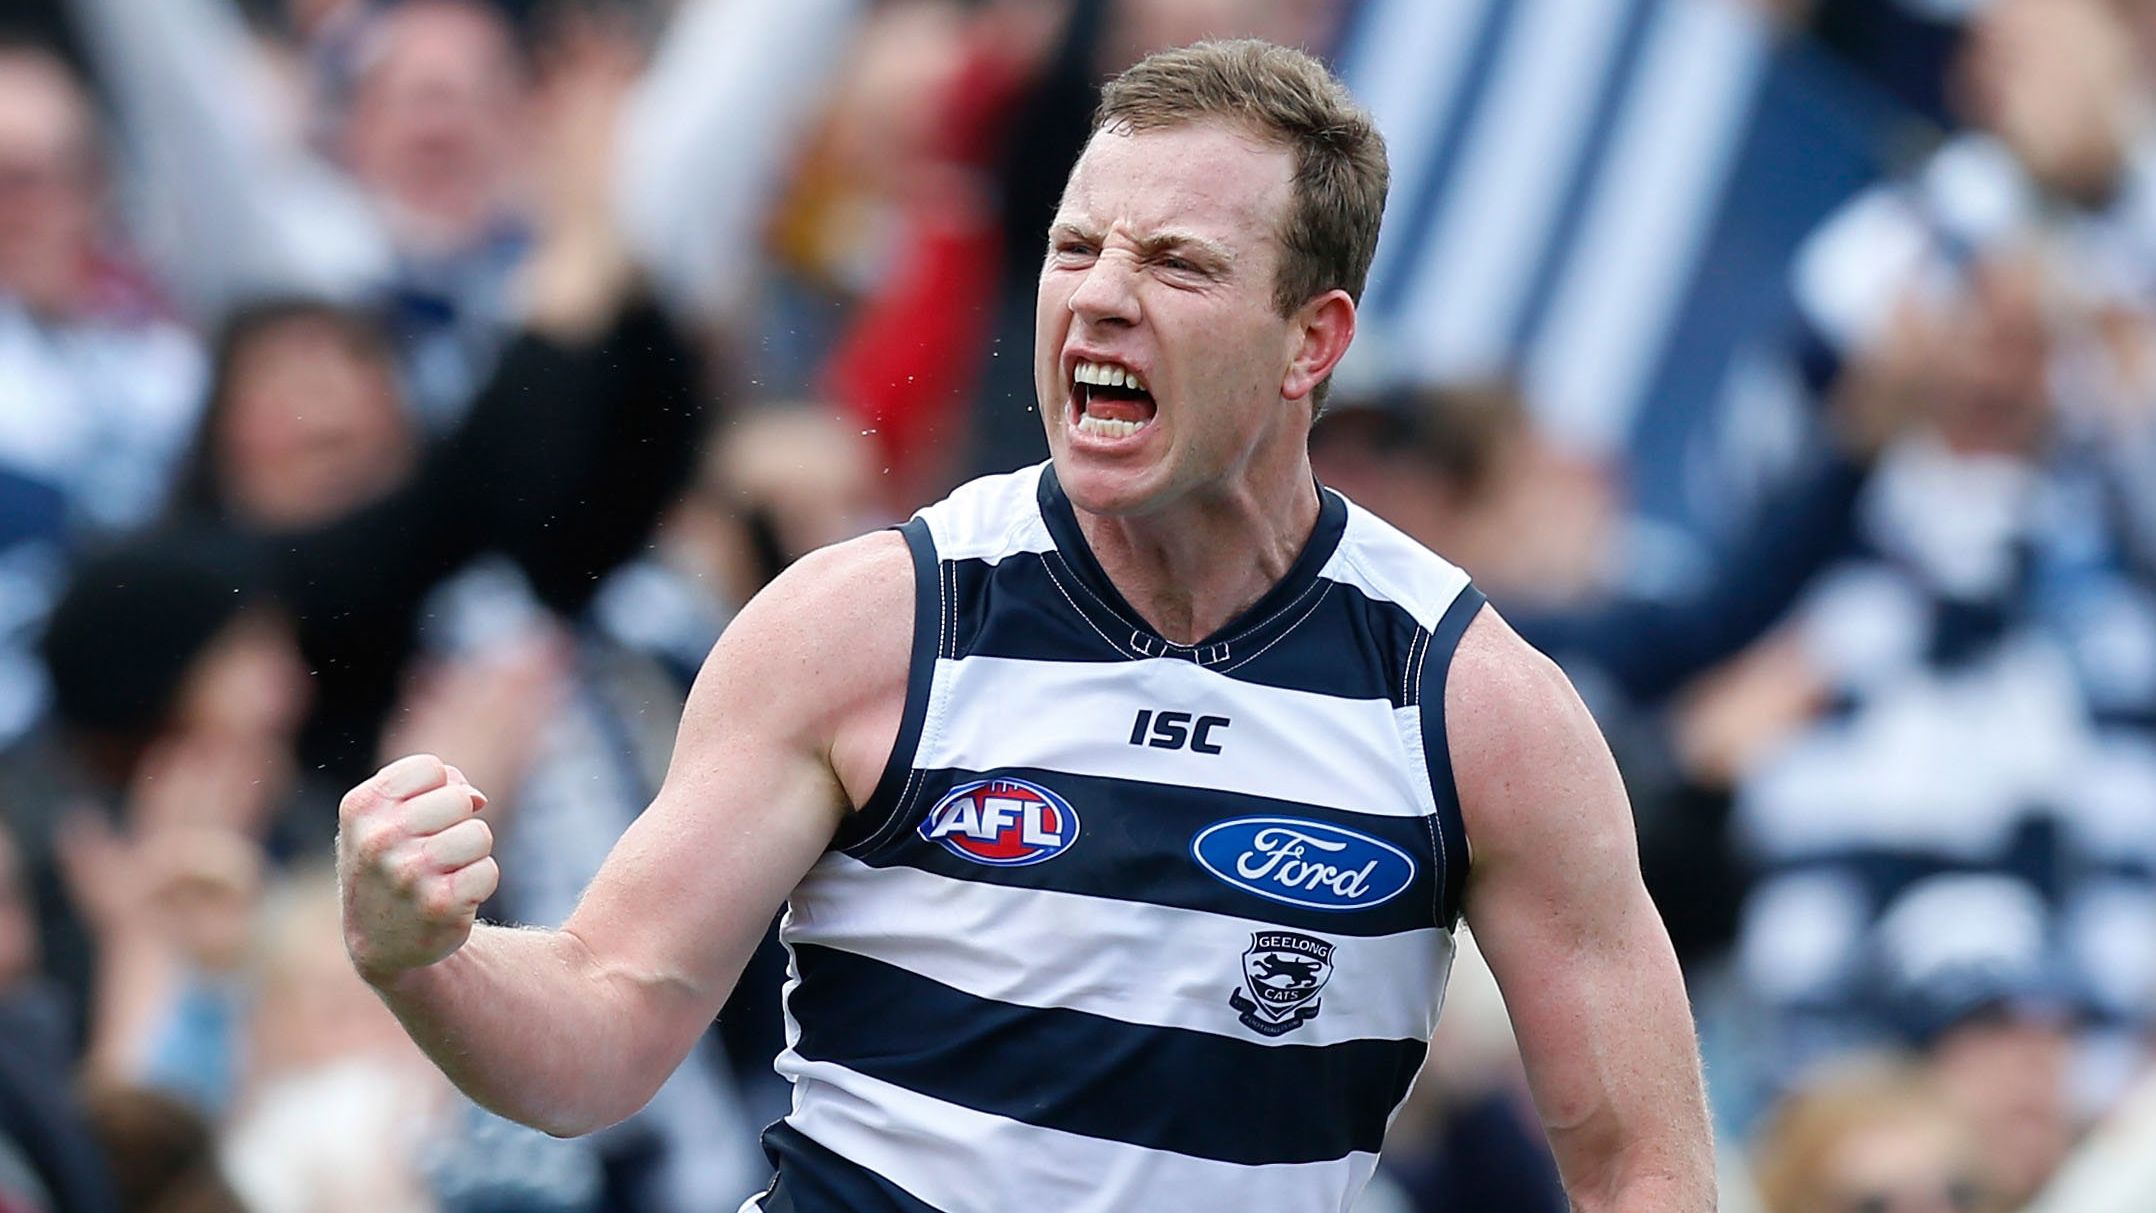 Steve Johnson in his last season for the Cats in 2015.